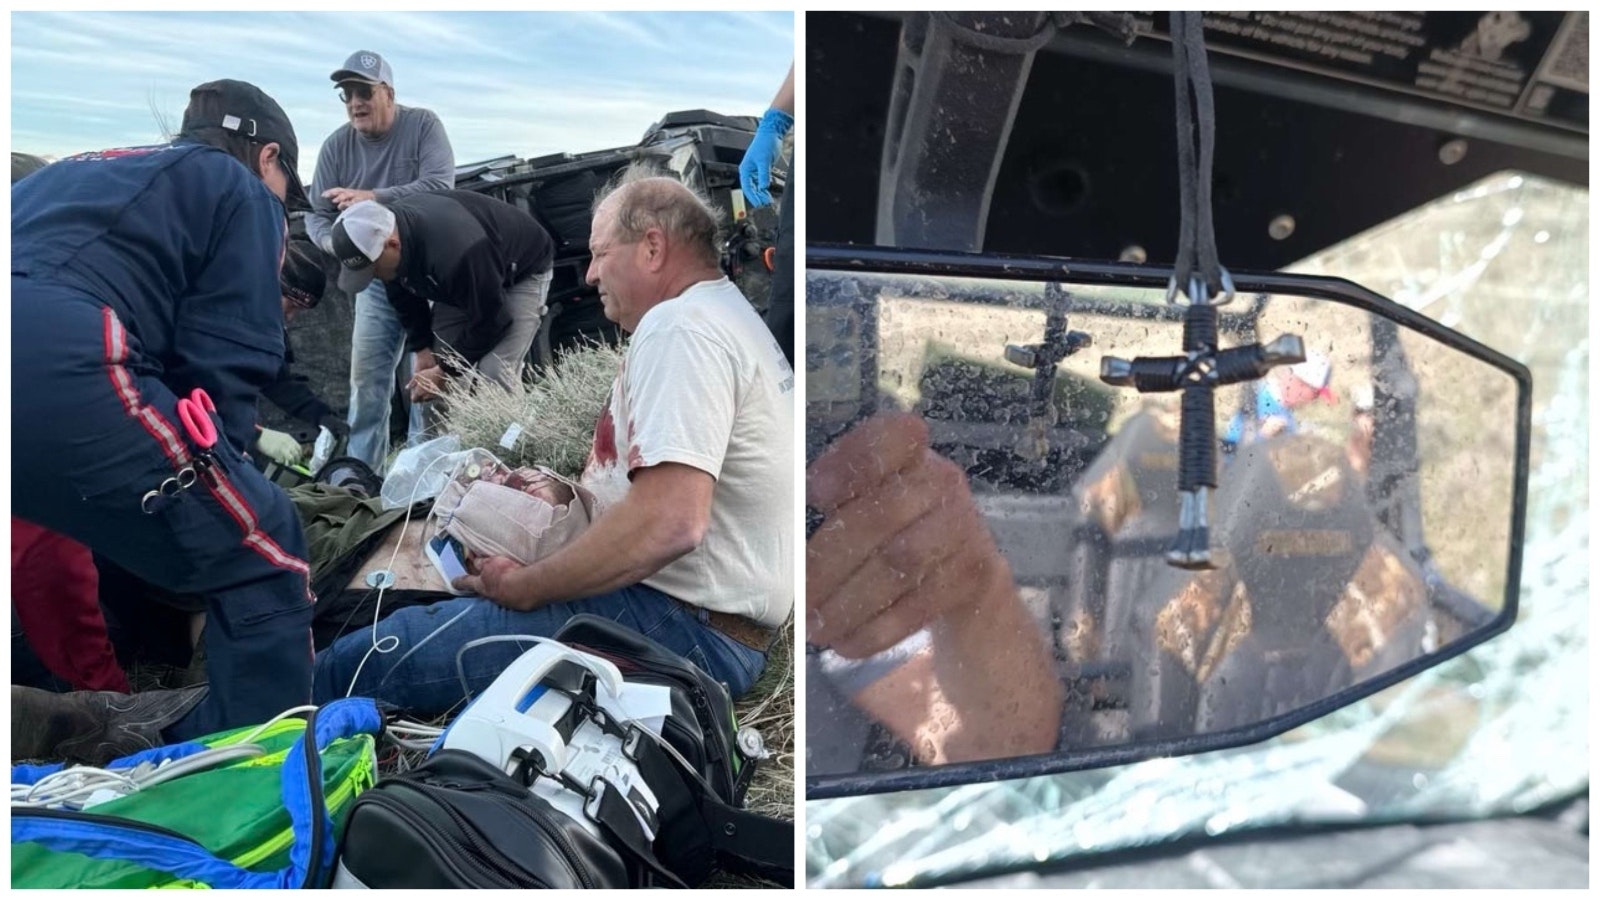 Left: Emergency responders stabilize Skylar Peterson after he was horribly injured in a side-by-side crash in Park County. Right: Skylar Peterson and Sydnie Stambaugh think this cross, which belonged to Peterson’s departed father, helped protected them during a side-by-side crash in Park County.